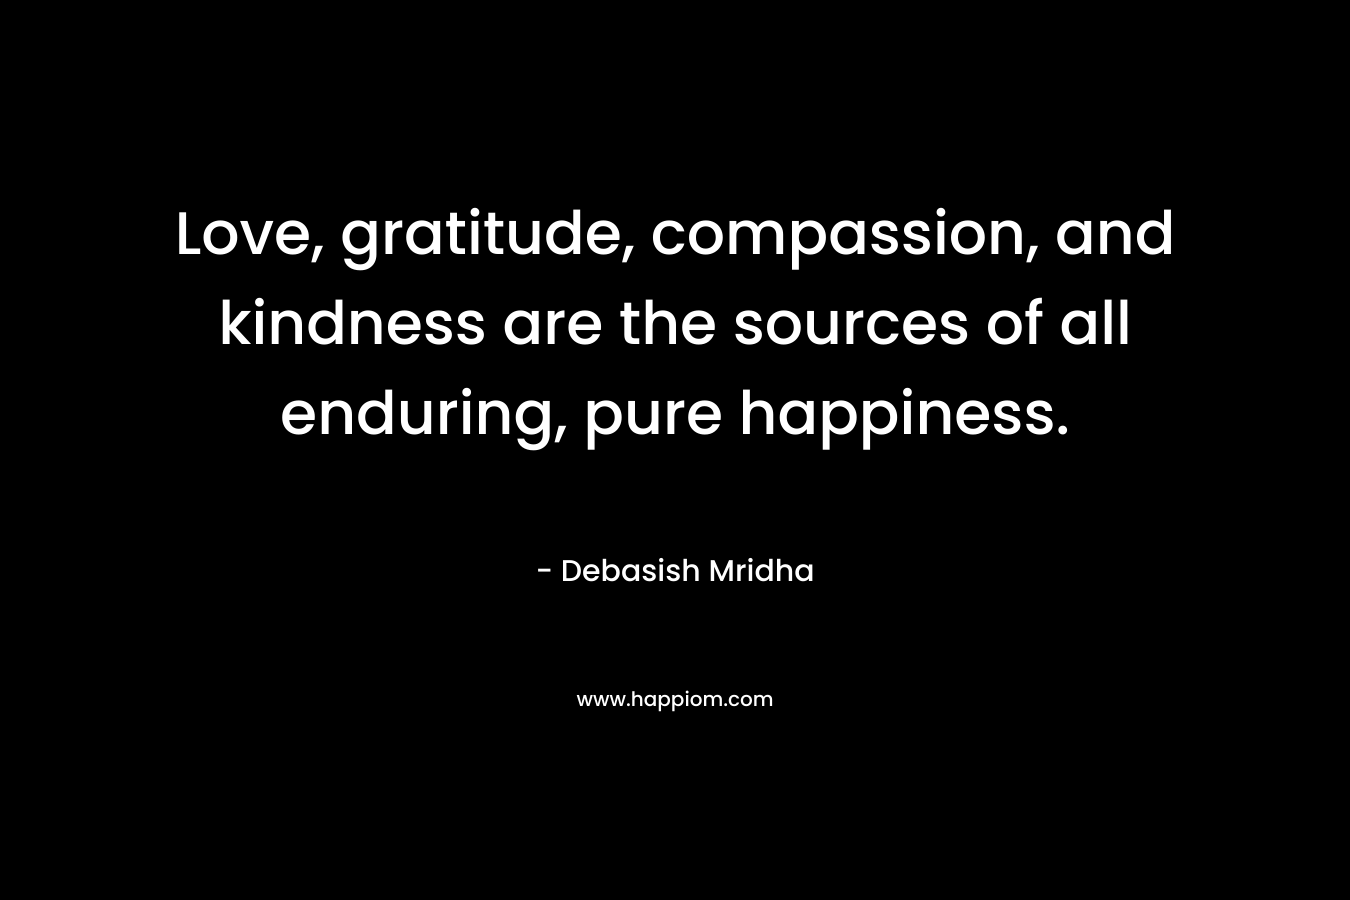 Love, gratitude, compassion, and kindness are the sources of all enduring, pure happiness.